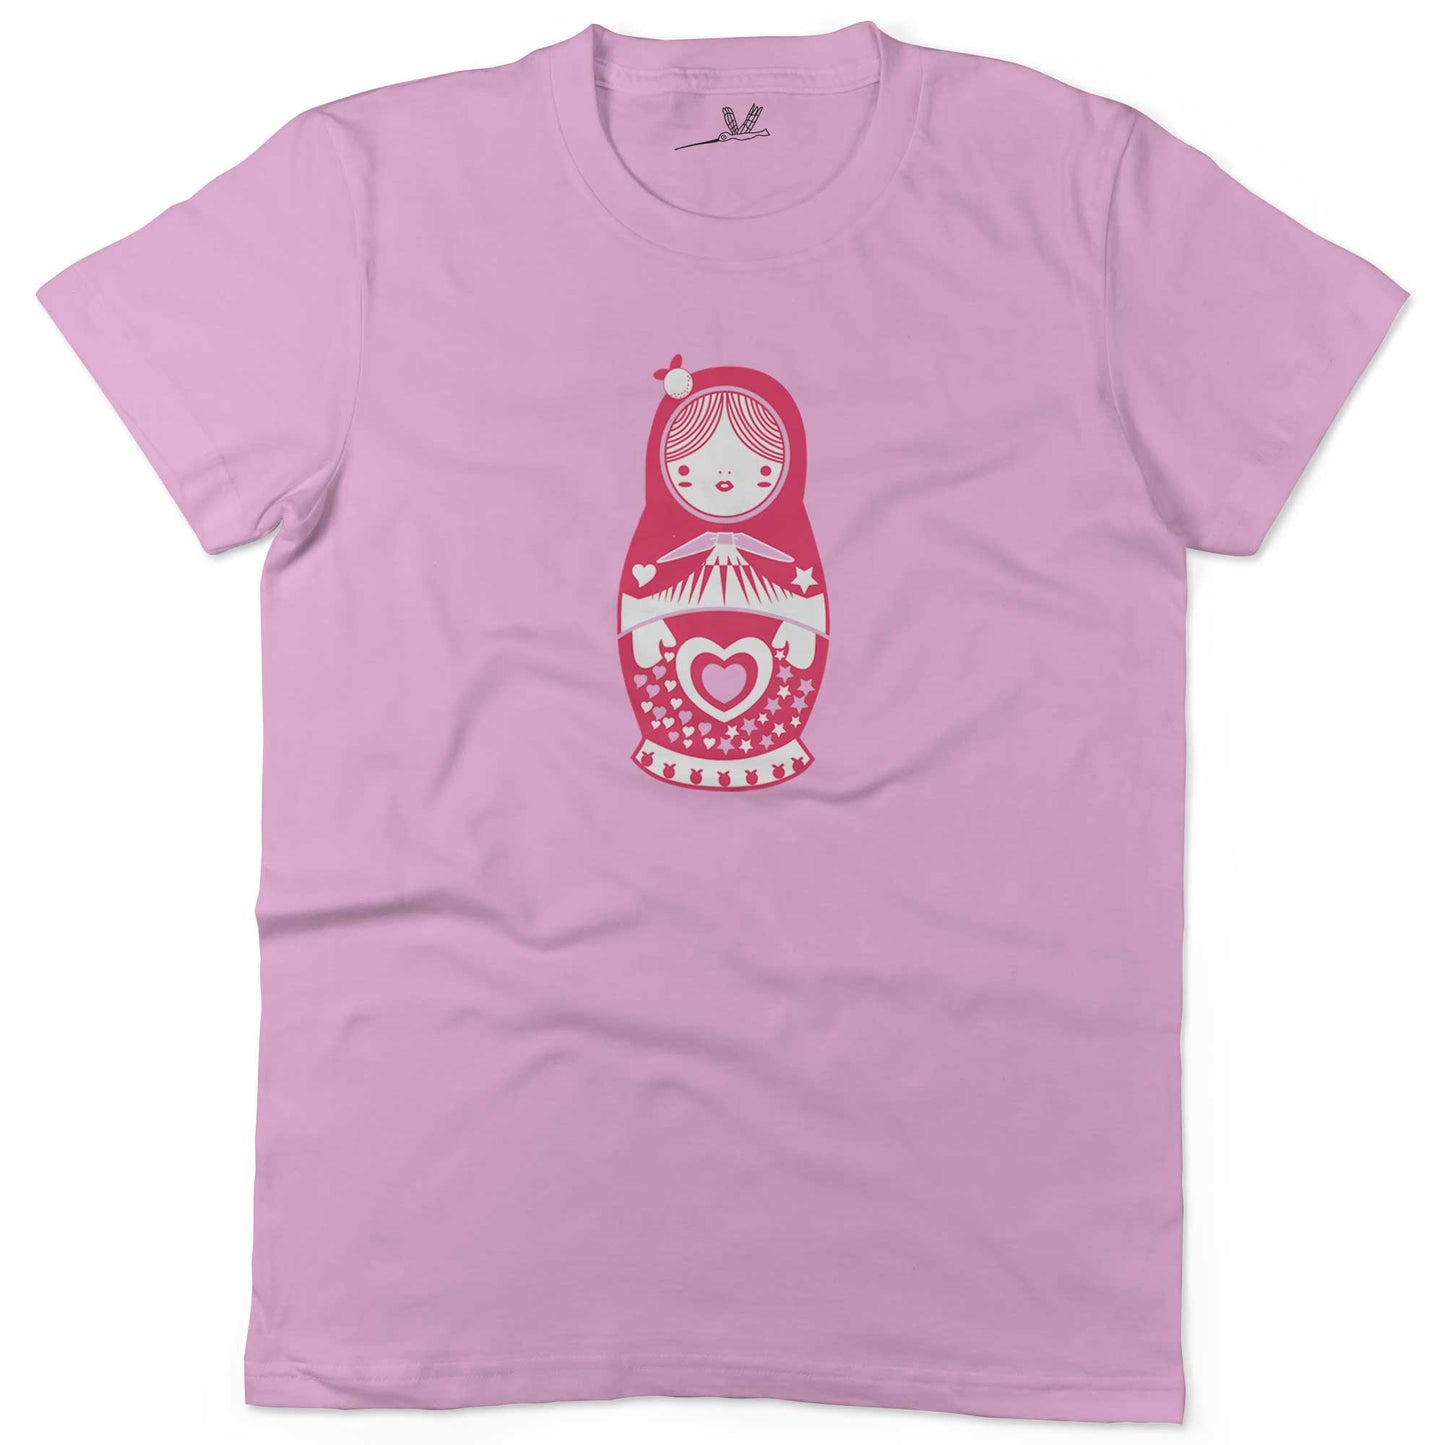 Russian Doll Unisex Or Women's Cotton T-shirt-Pink-Woman